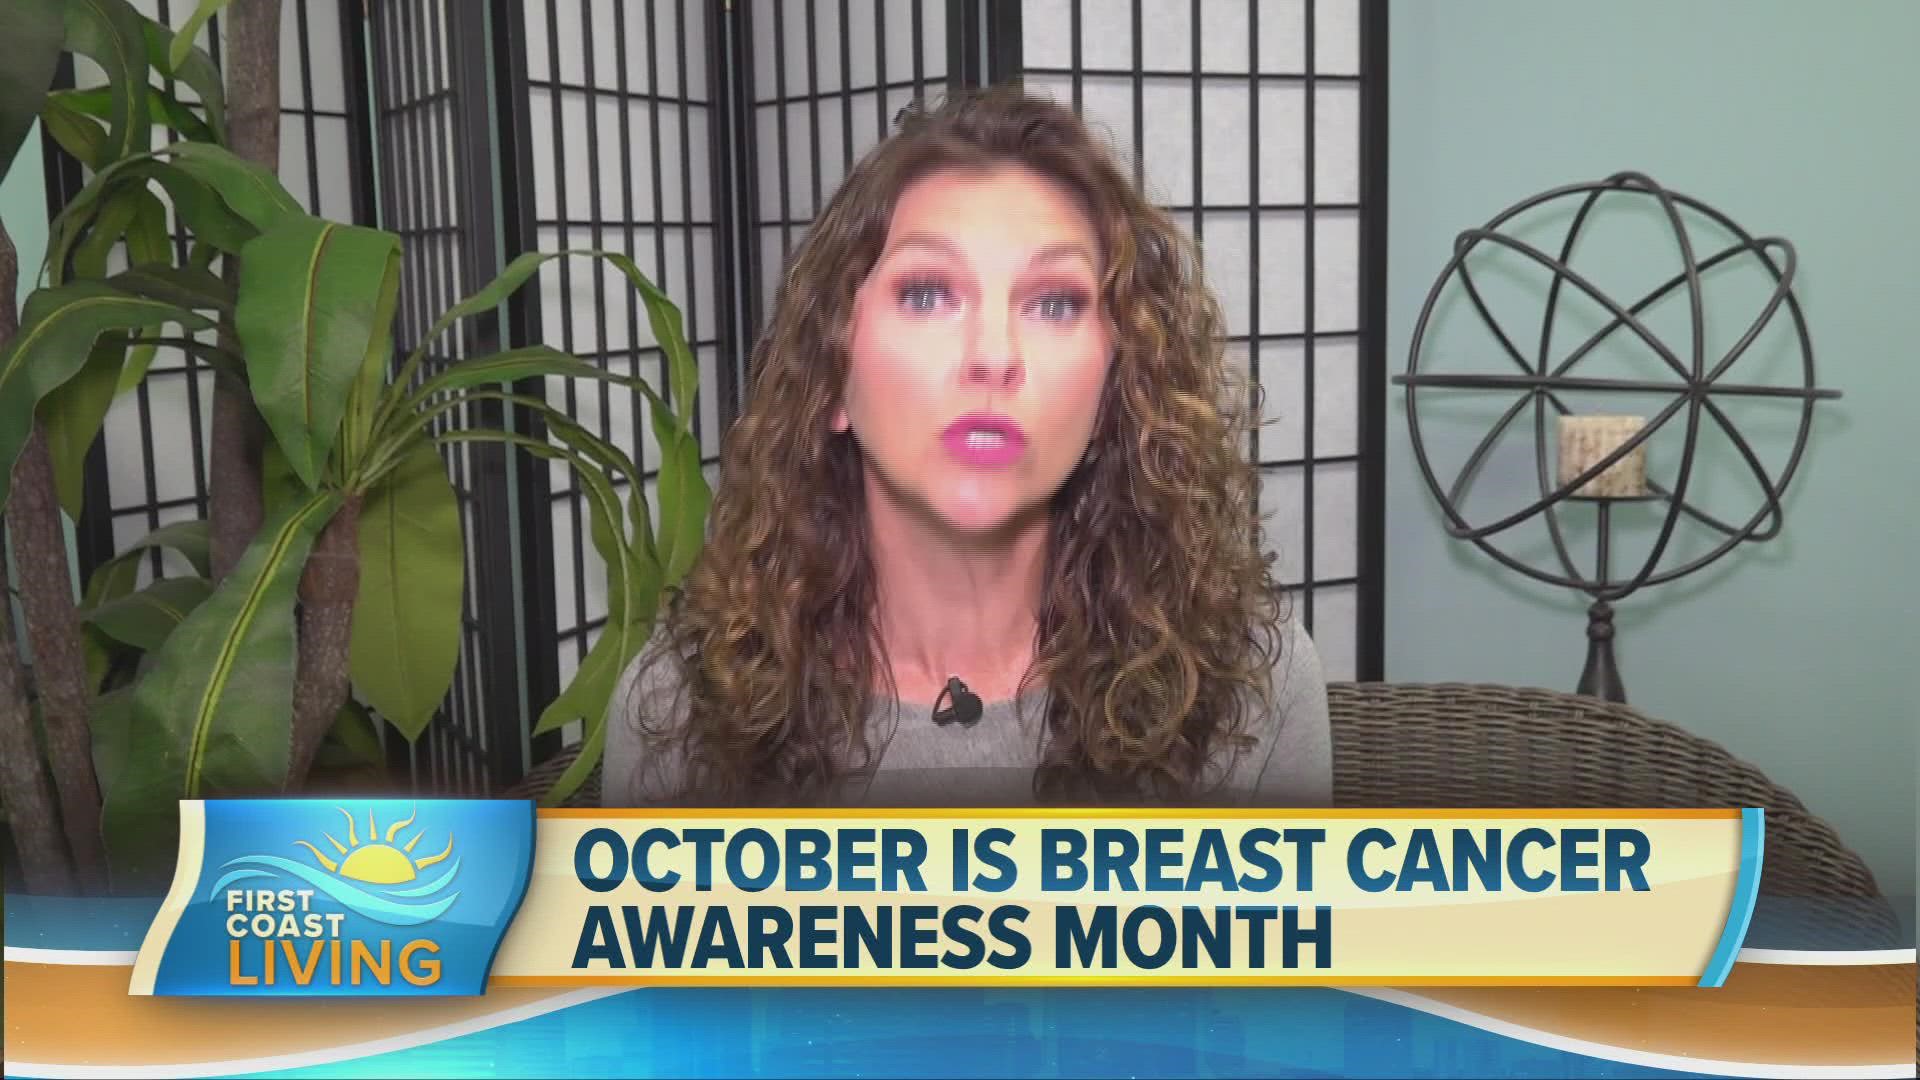 Advance Practice Registered Nurse specializing in Women's Health, and UNF nursing instructor, Amy Howell shares a few ways you can lower your breast cancer risk.